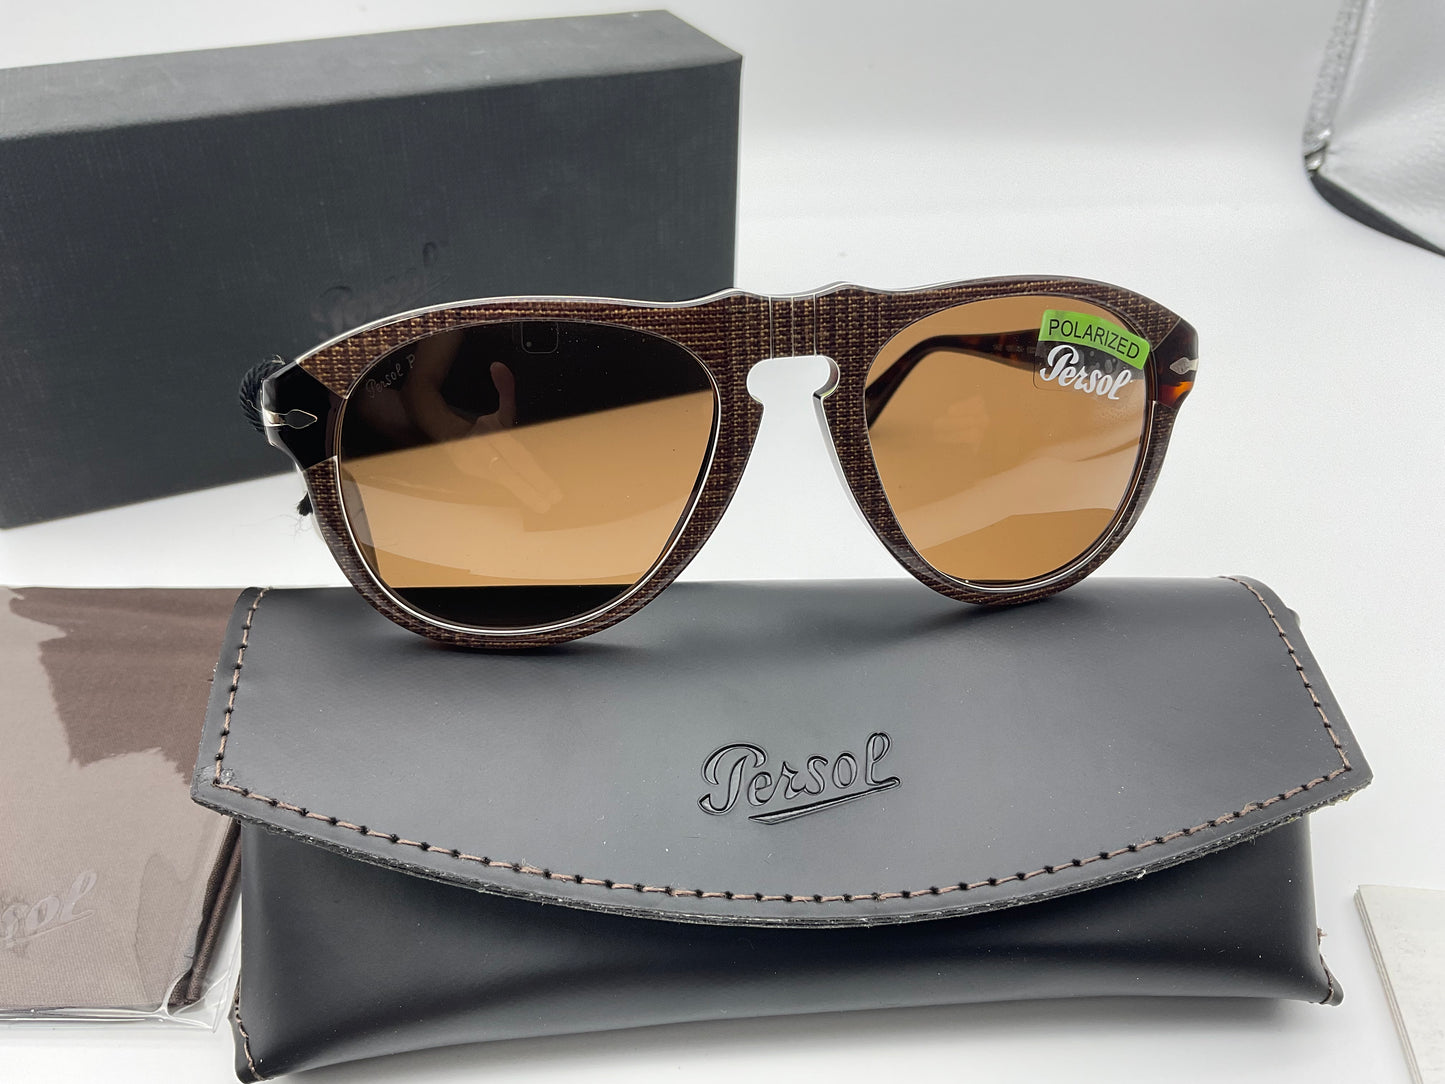 PERSOL SUNGLASSES 649 1091AN BROWN POLARIZED 52mm